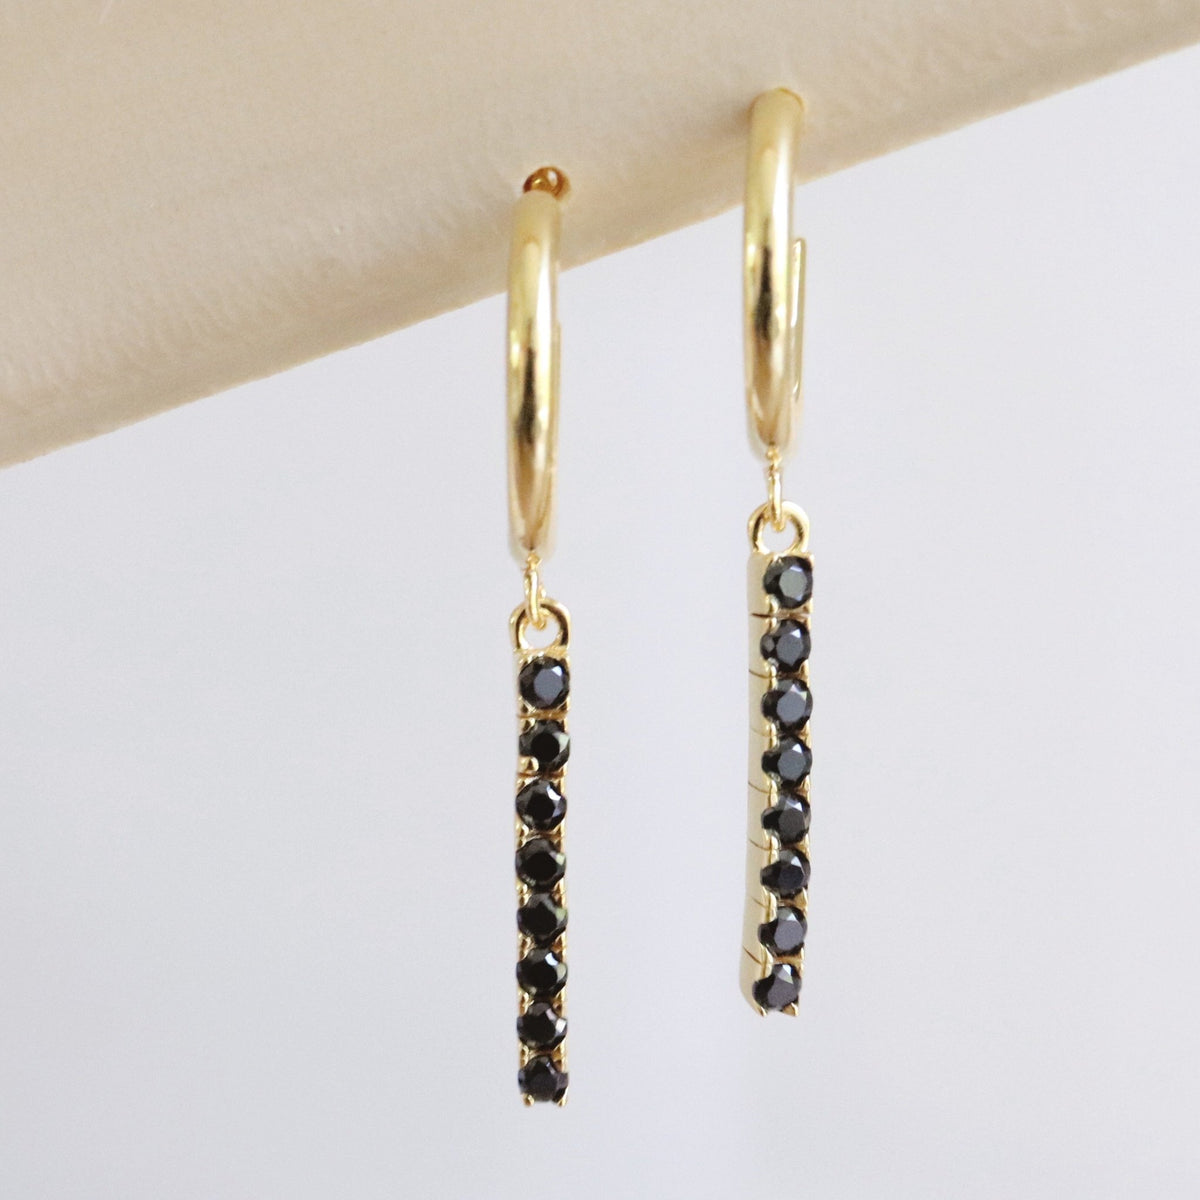 LOVE TENNIS HOOPS - BLACK CUBIC ZIRCONIA &amp; GOLD - SO PRETTY CARA COTTER